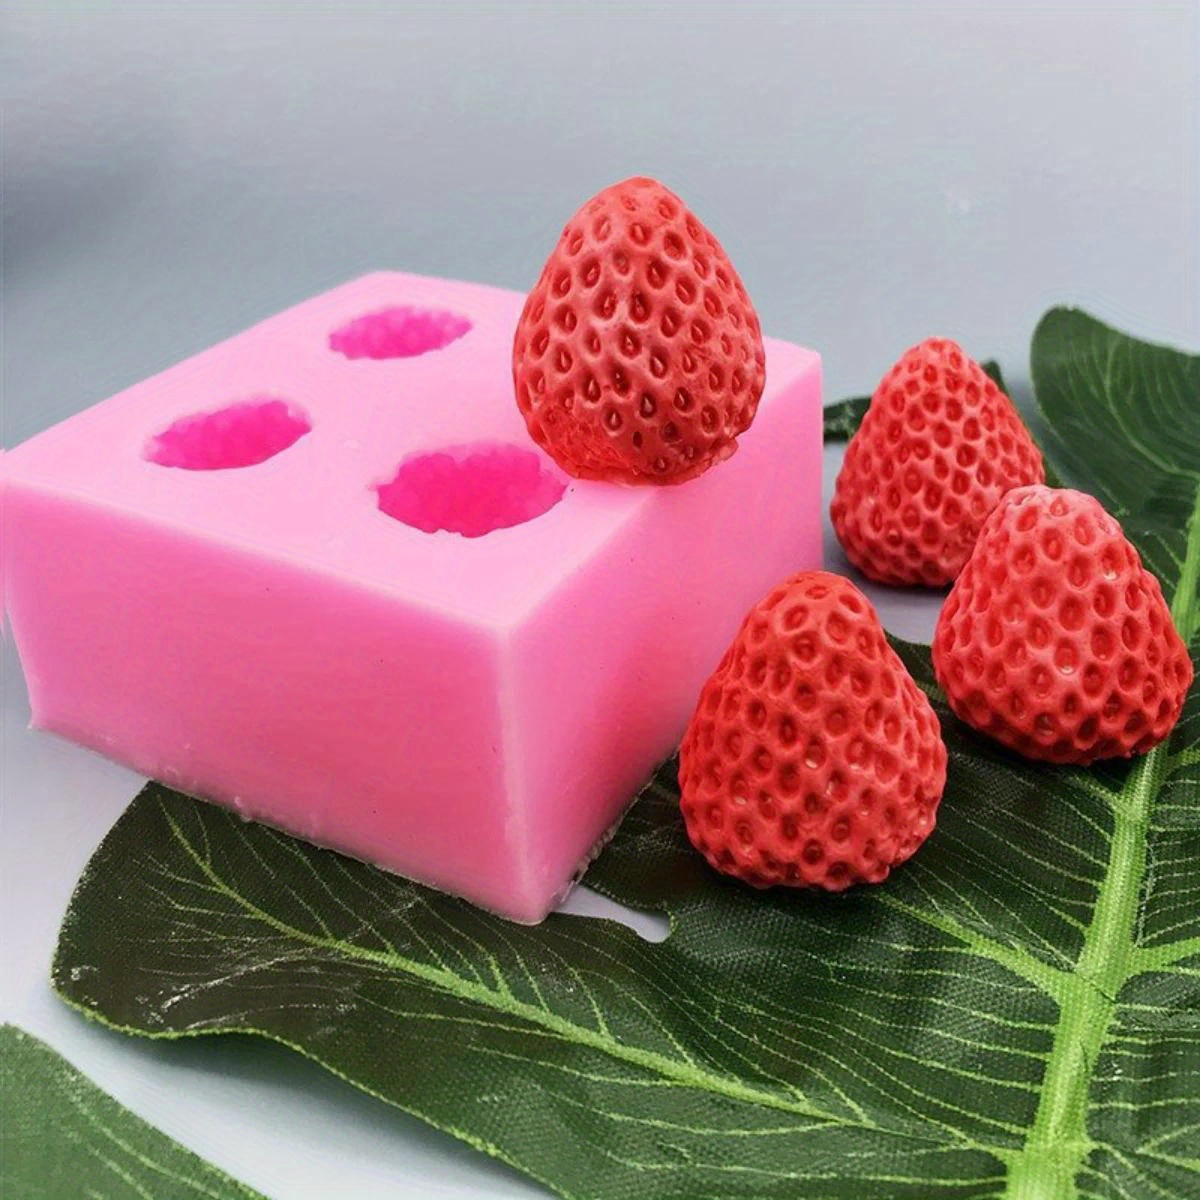 

1pc Strawberry Silicone Mould Fondant Cake Chocolate Jelly Baking Mold Candle Making Plaster Ornament Silicone Mold